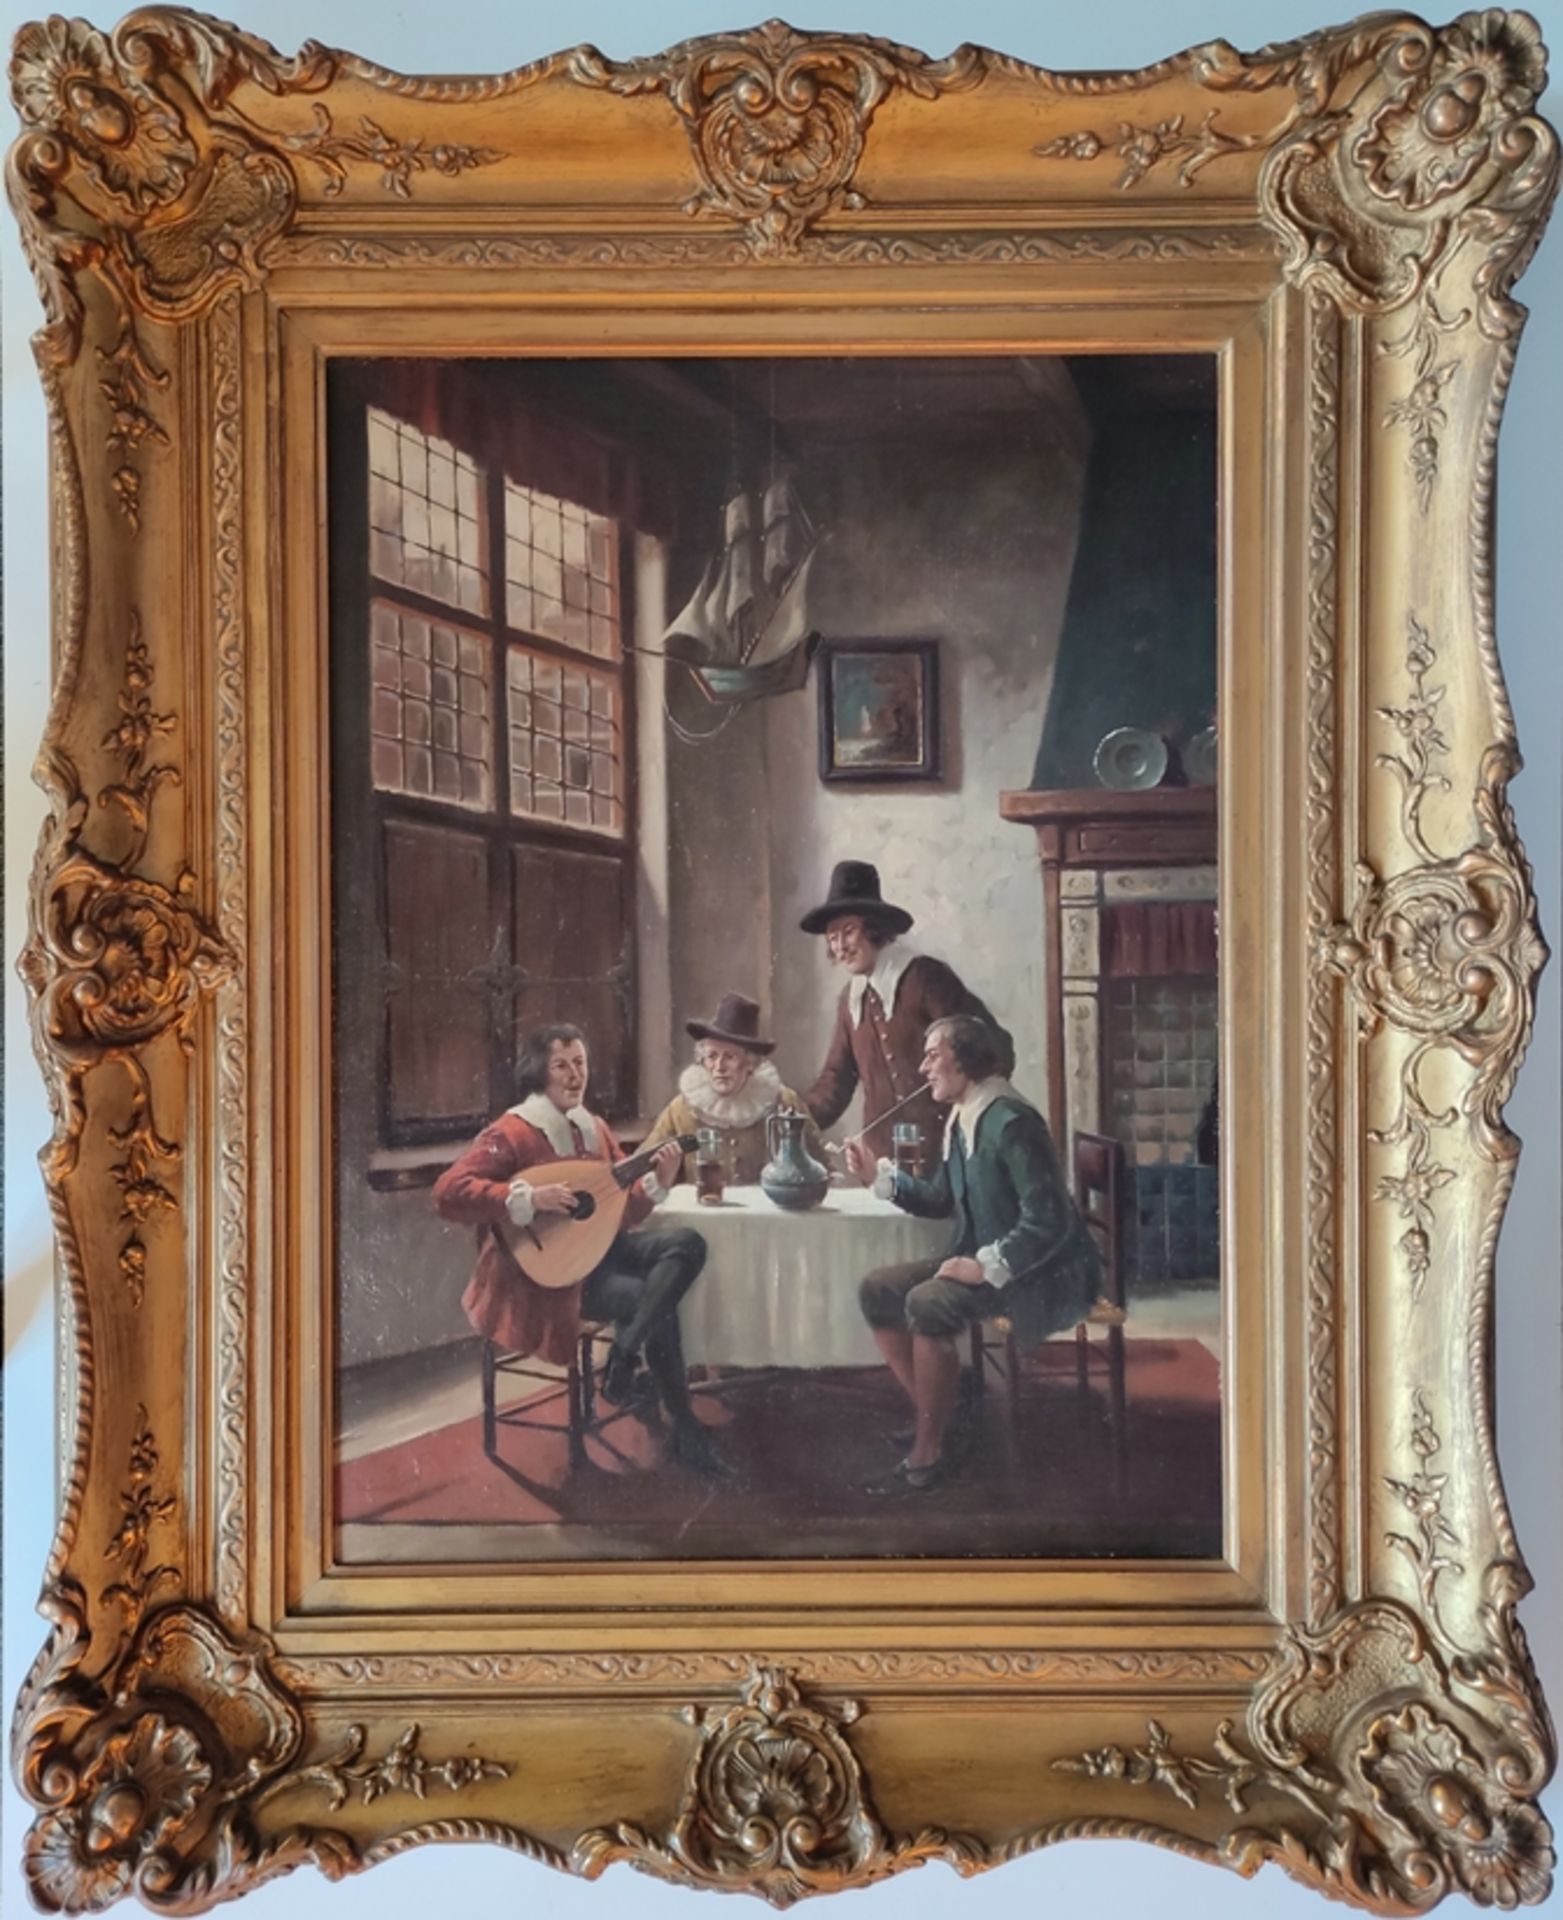 Leaves, Bruno (1870-?) "Interior scene" with a circle of gentlemen, in Baroque style, four men drin - Image 2 of 5